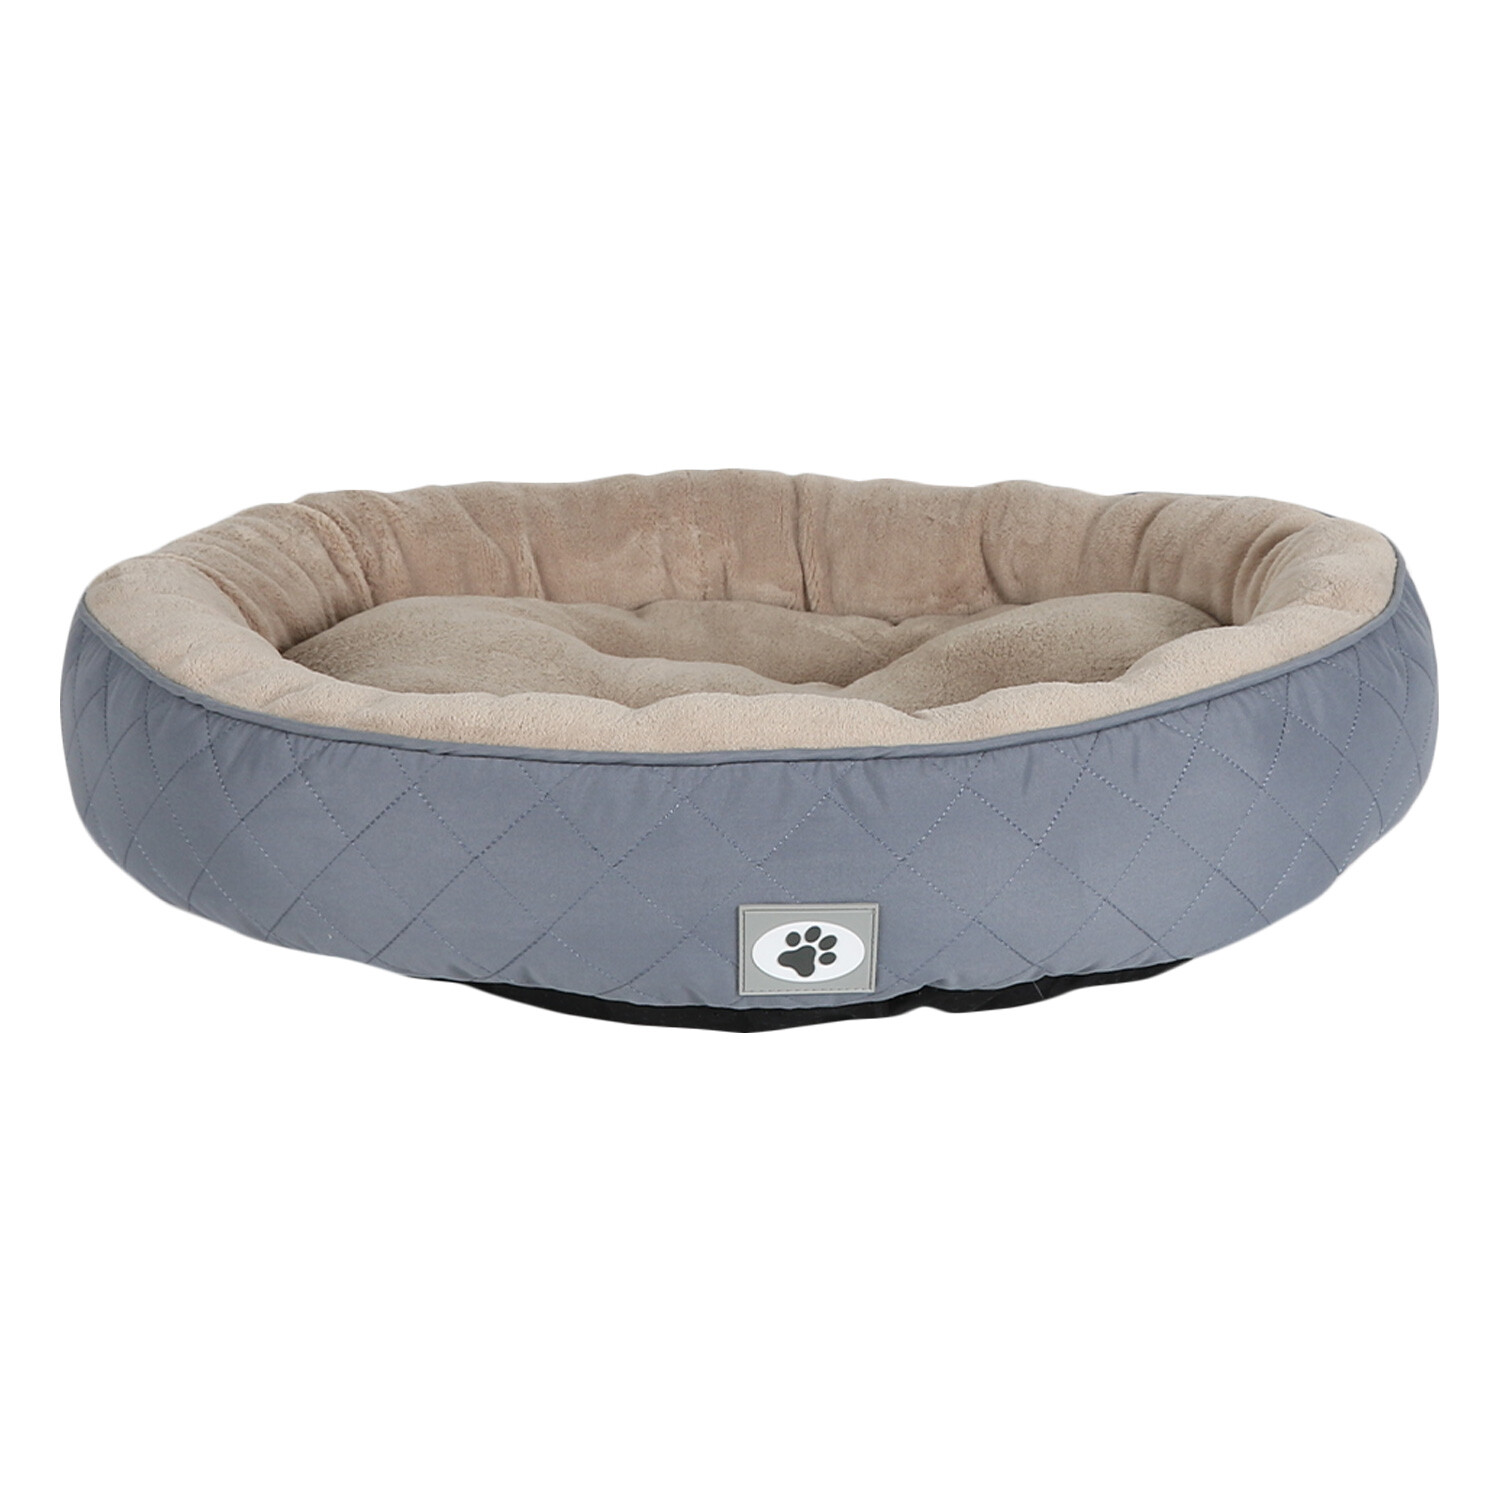 Snuggle Round Pet Bed Image 2